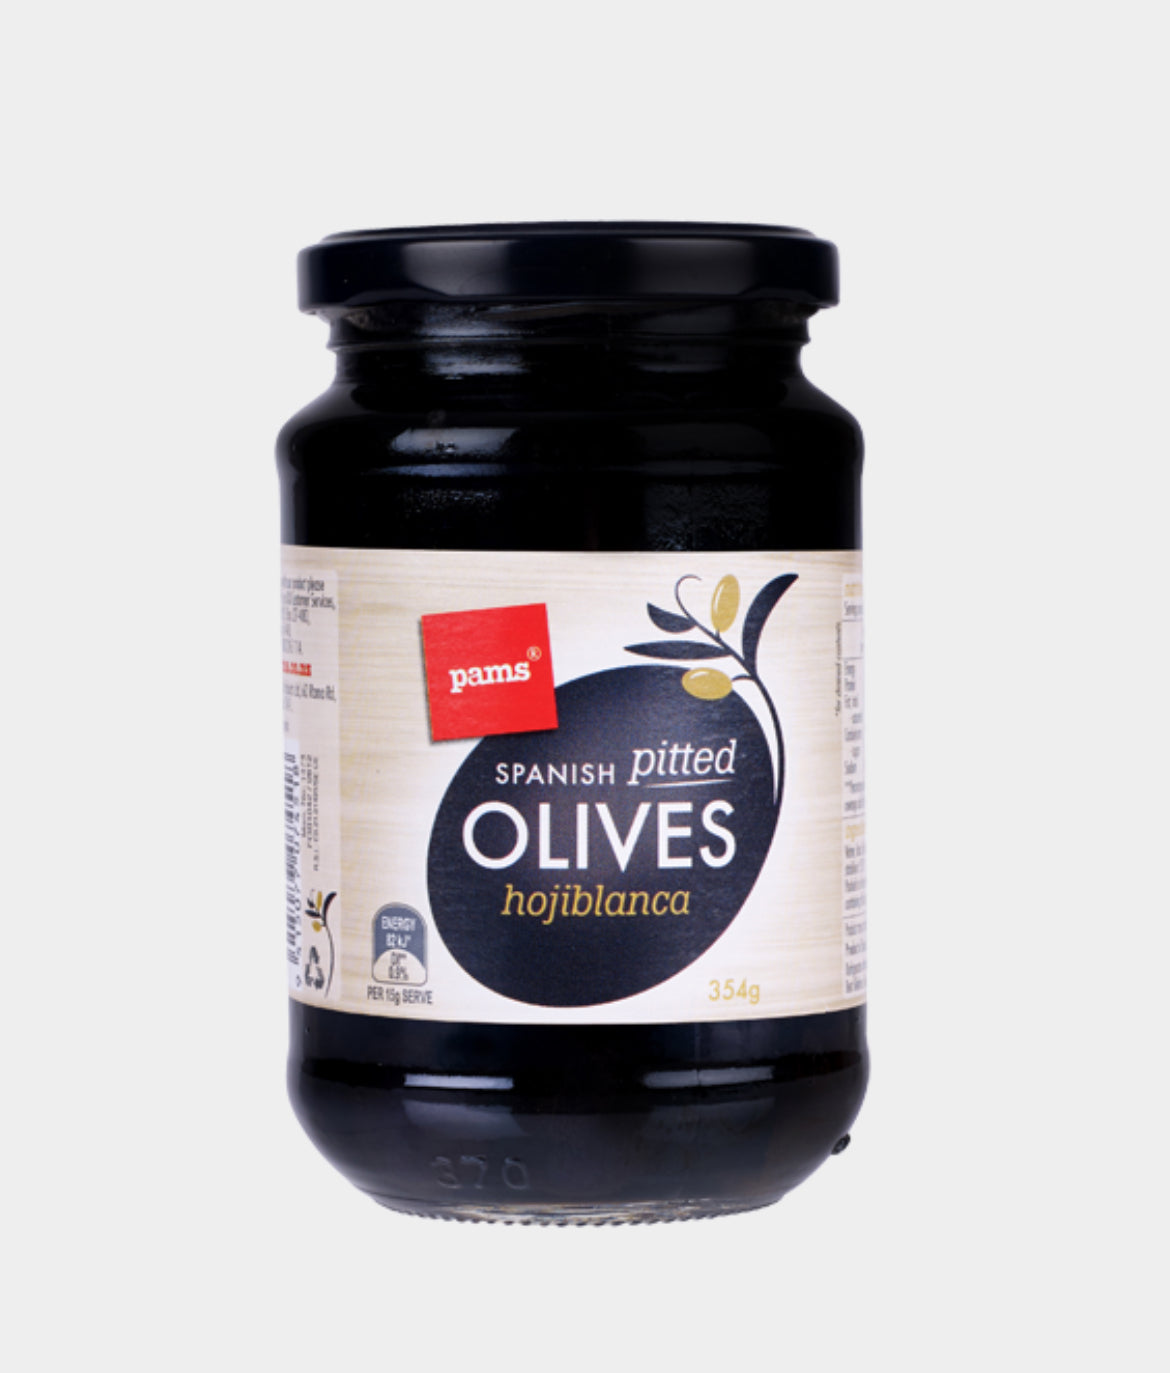 Pam’s Spanish pitted Olives